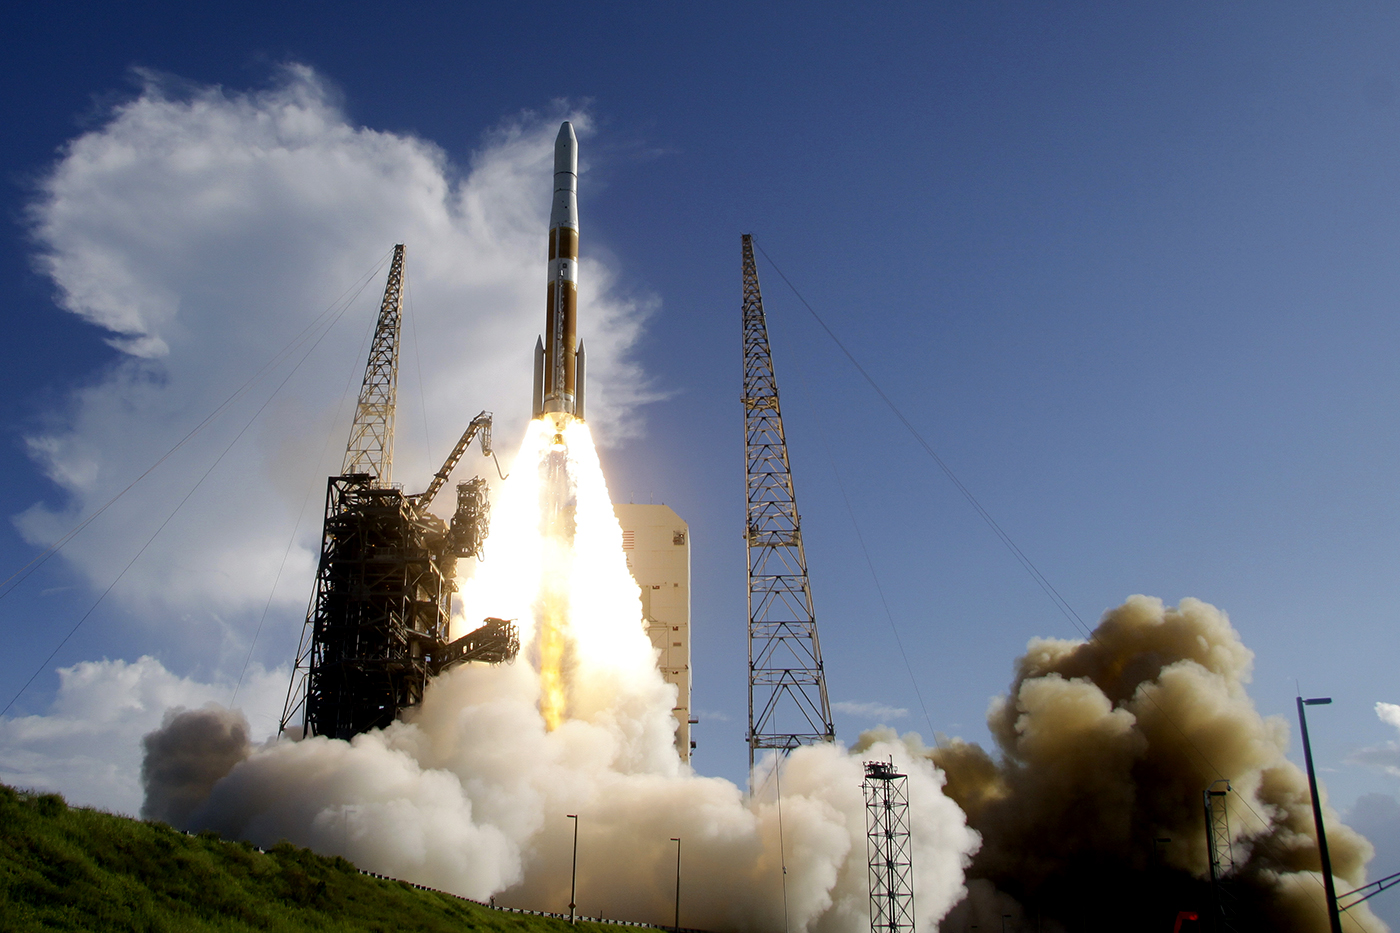 A United Launch Alliance Delta IV rocket lifts off from space launch complex 37 at the Cape Canaveral Air Force Station with the second Global Positioning System III payload on Thursday, Aug. 22, 2019, in Cape Canaveral, Florida. (AP Photo/John Raoux)